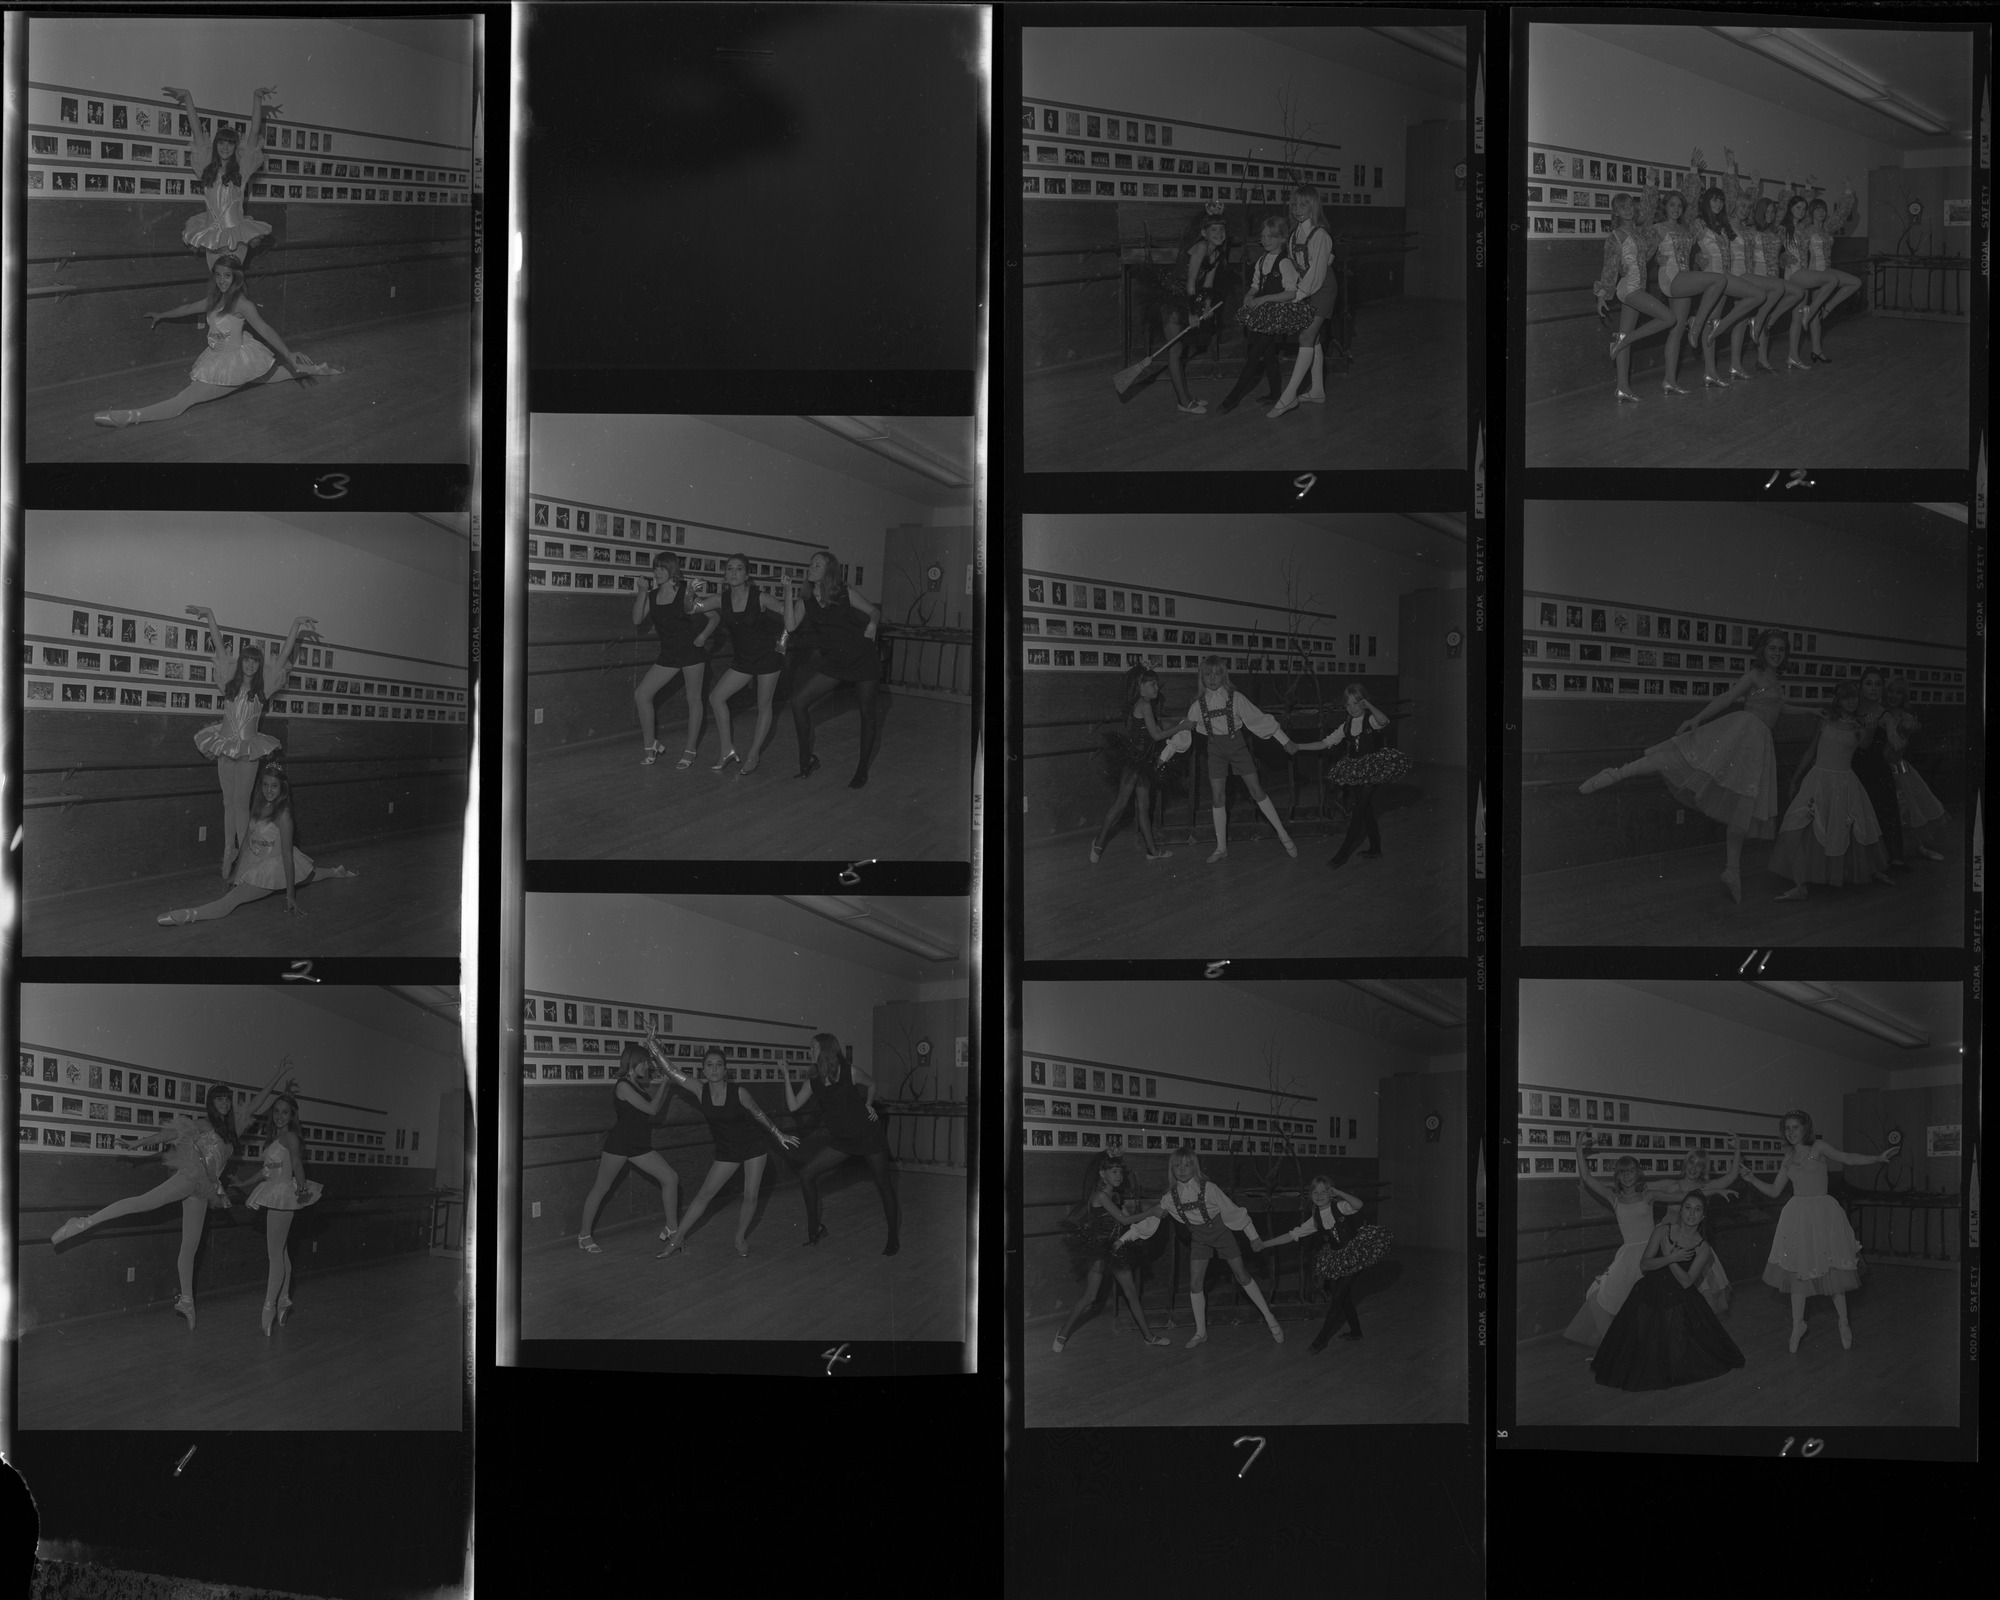 Set of negatives by Clinton Wright including Mr. & Mrs. Goynes, Mrs. Goynes at Madison, Kit Carson Award program (drill team), Jay Elliott, and Dorothy Frankivich at Dance School, 1970, page 1